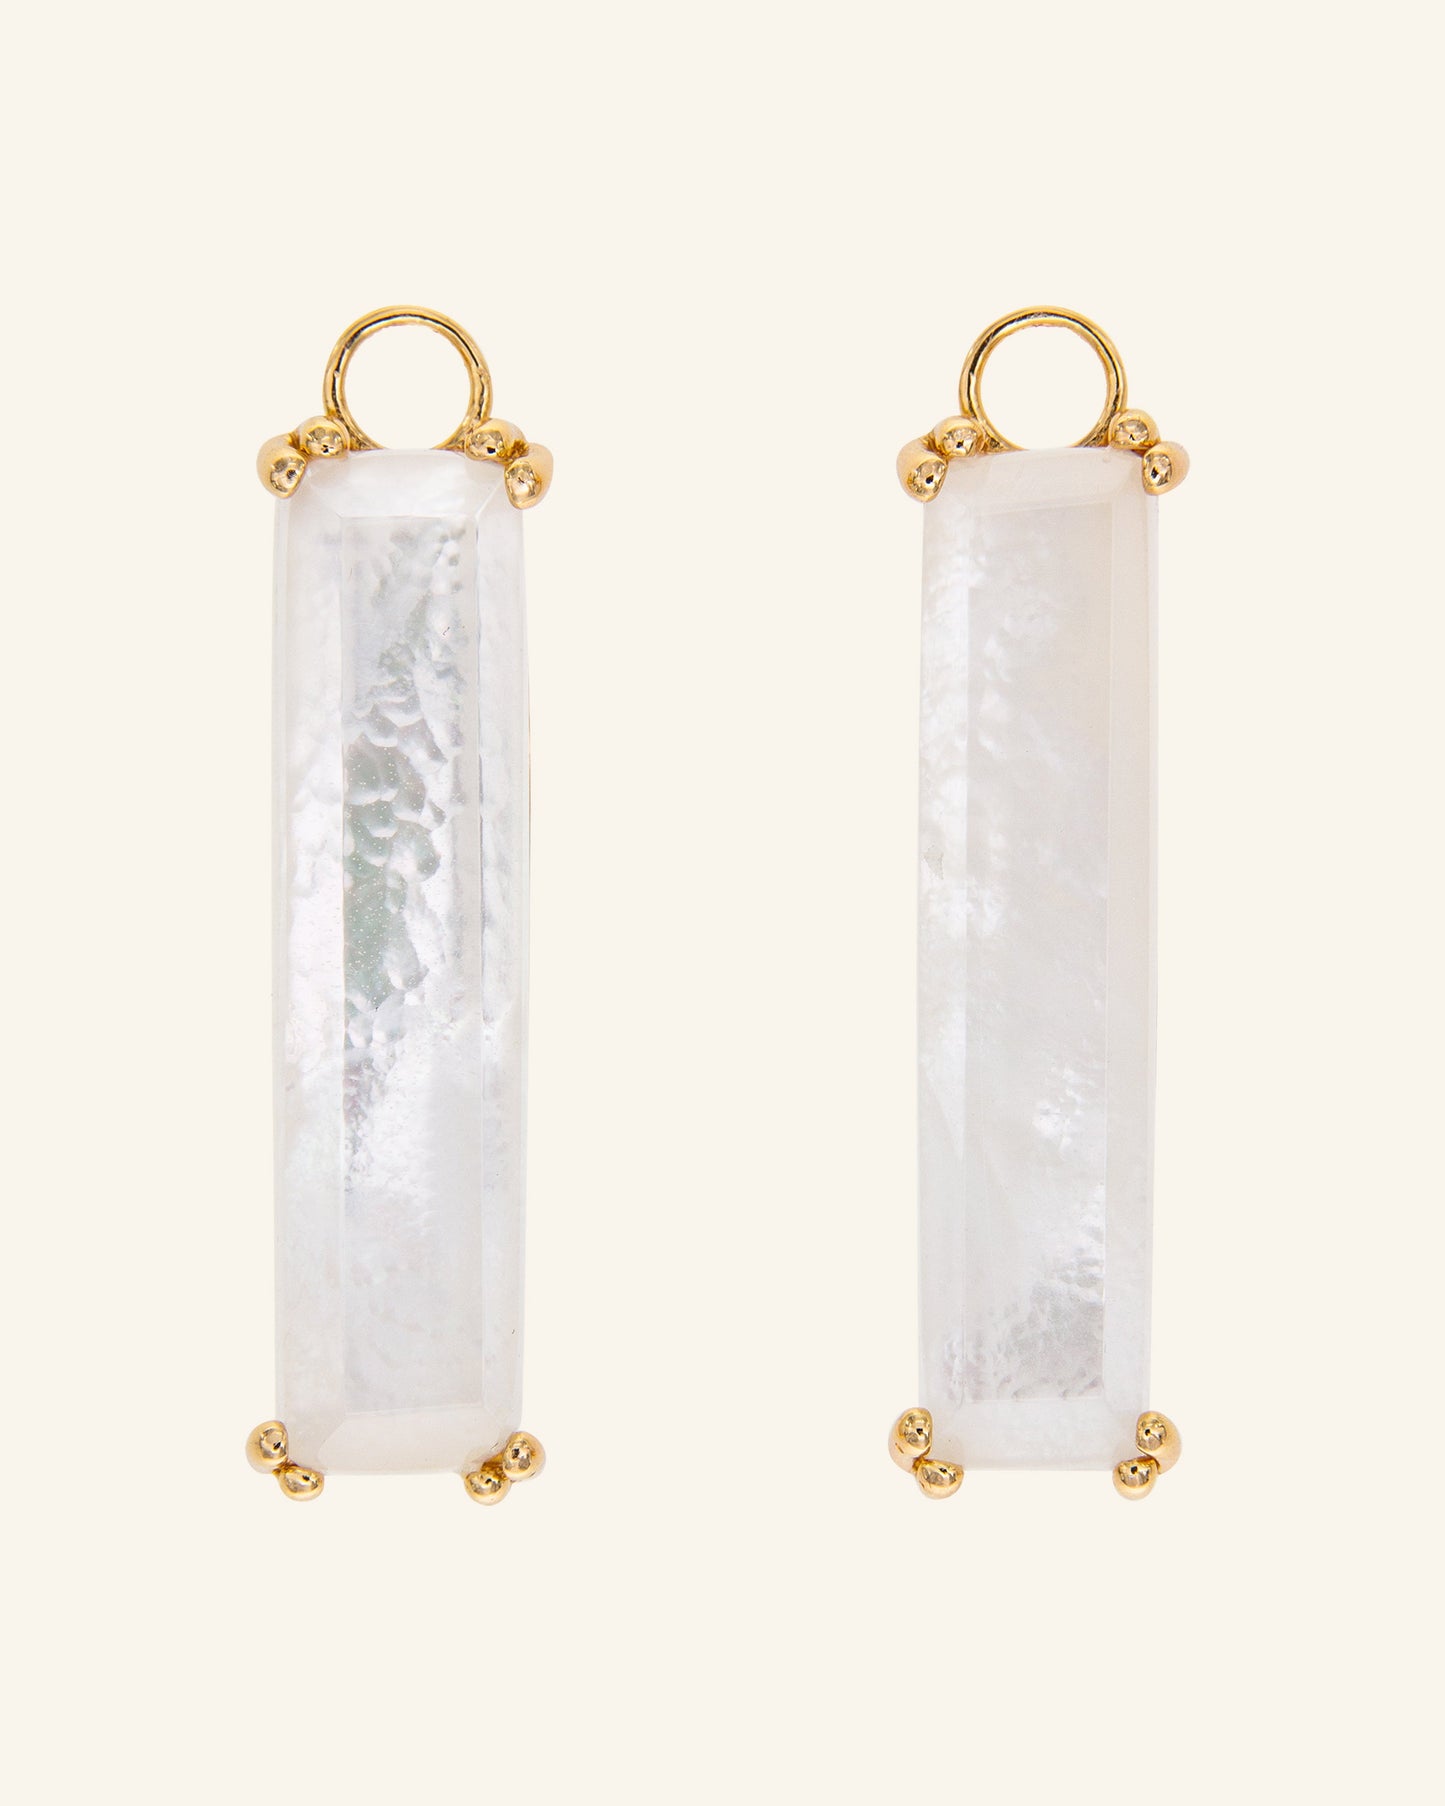 Gatsby pendants with white mother of pearl